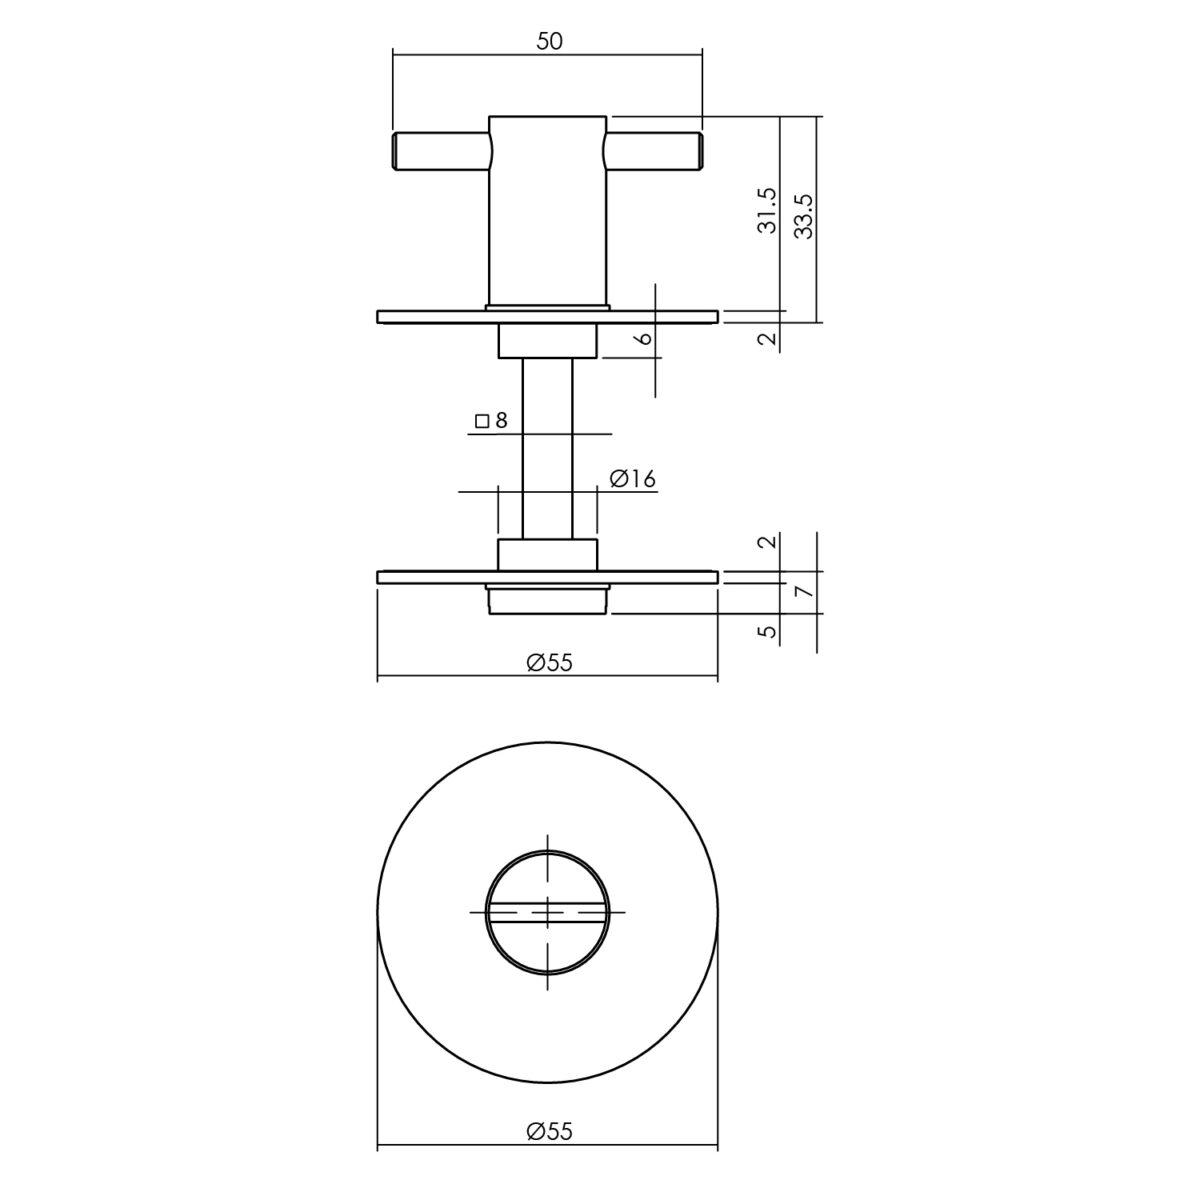 LINE DRAWING_WC CLOSURE 8MM RENOVATION SELF-ADHESIVE, Ø55X2MM STAINLESS STEEL